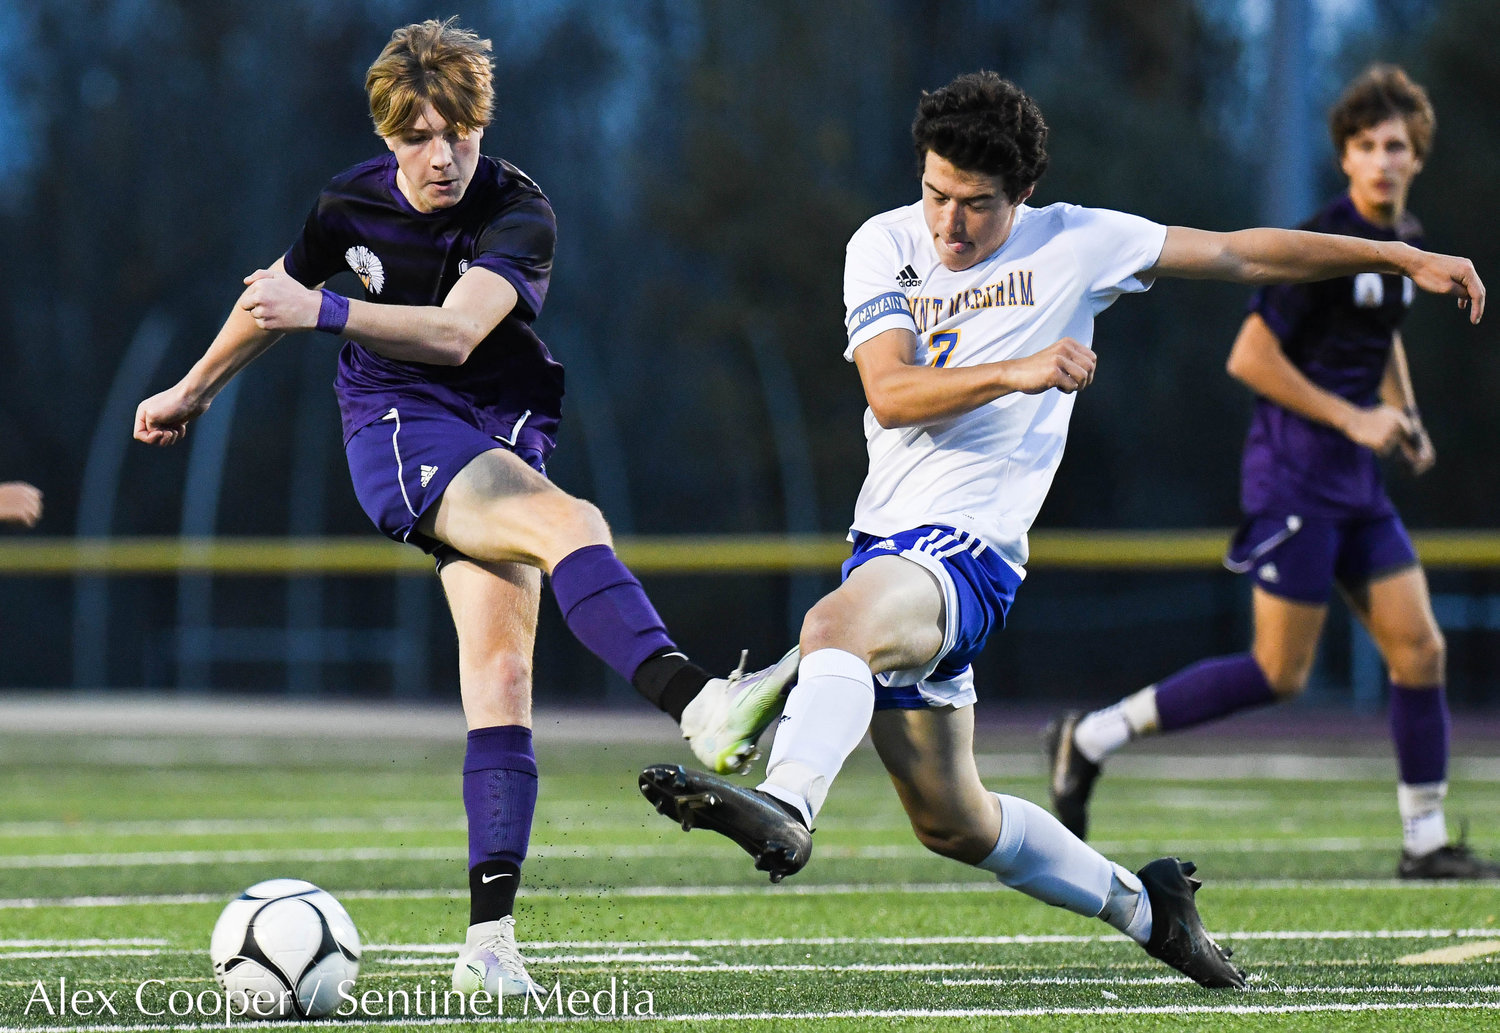 Waterville player Jonathon Stiles and Mt. Markham player Kevin Gates fight for control of the ball during the Class C boys soccer semifinals on Wednesday, Oct. 26 at Canastota.